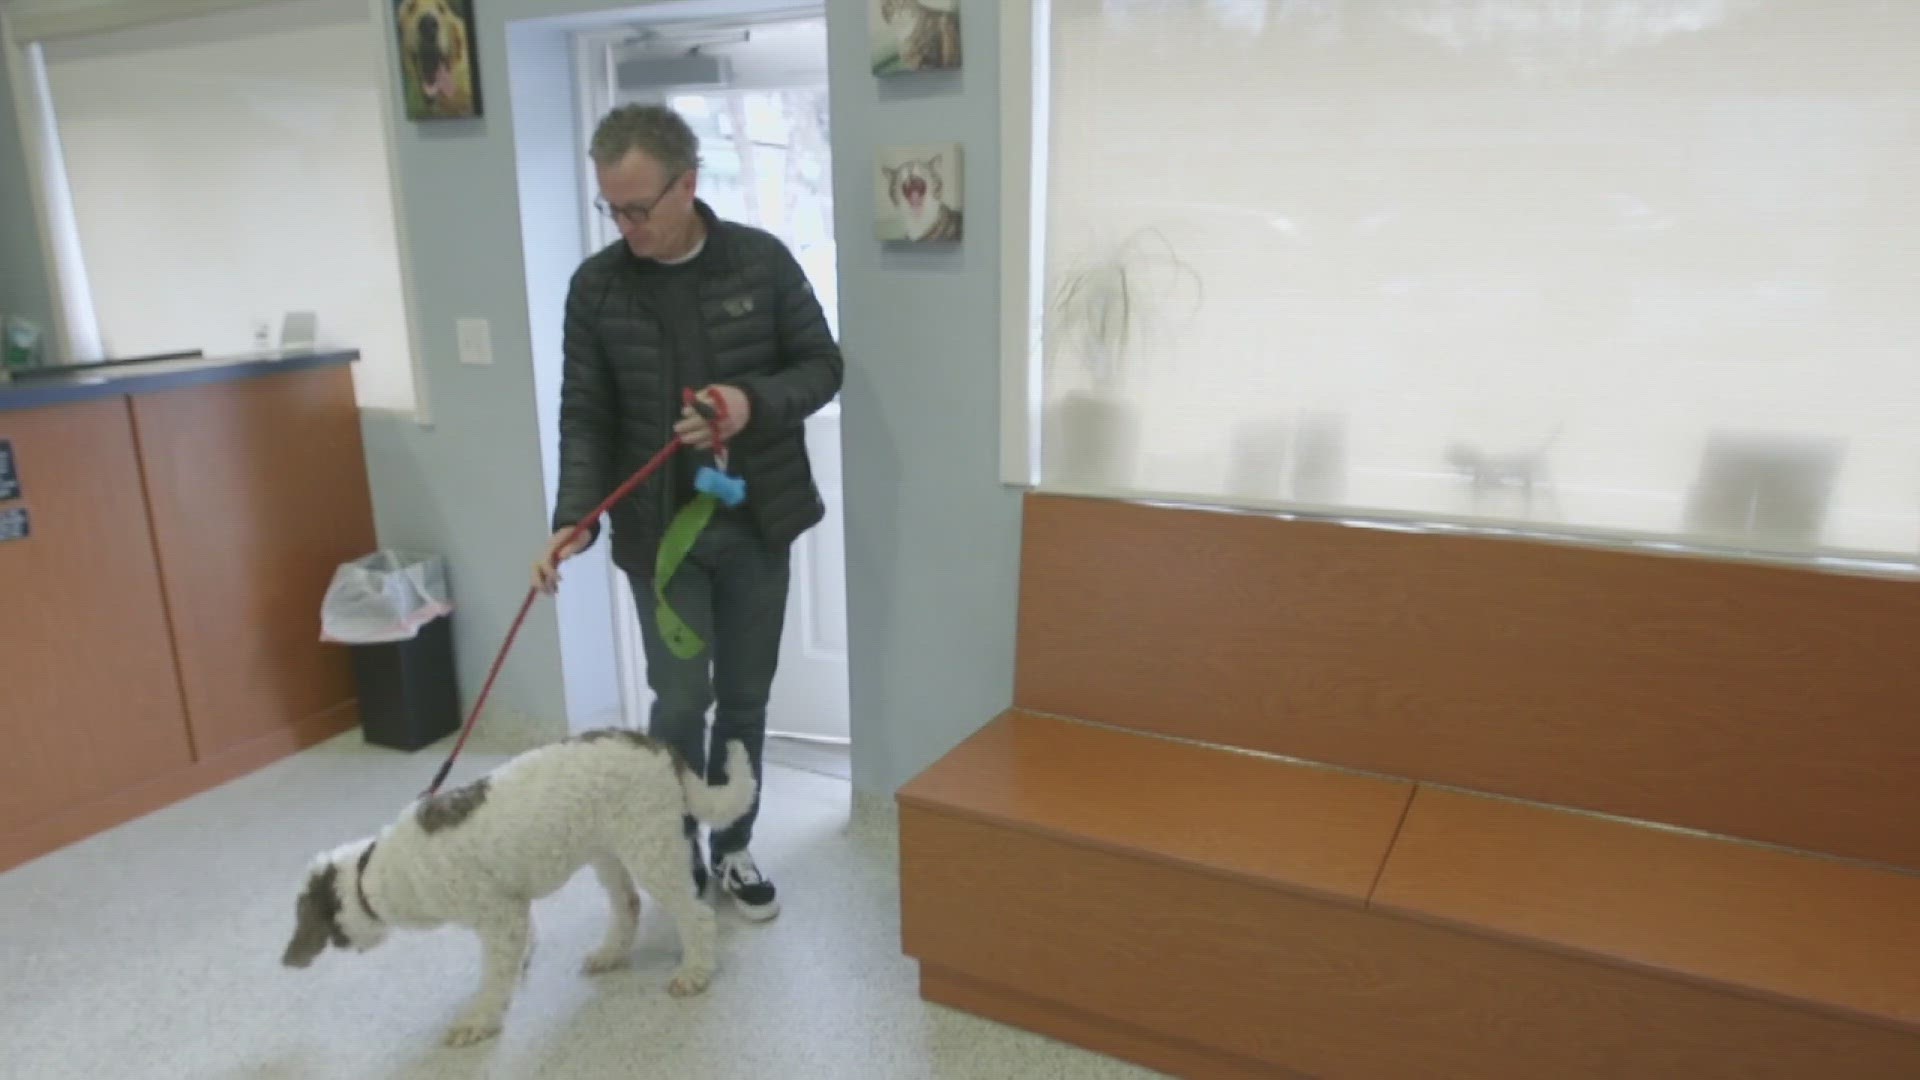 Consumer Investigator Steve Staeger says there may be a better way to save at the vet.